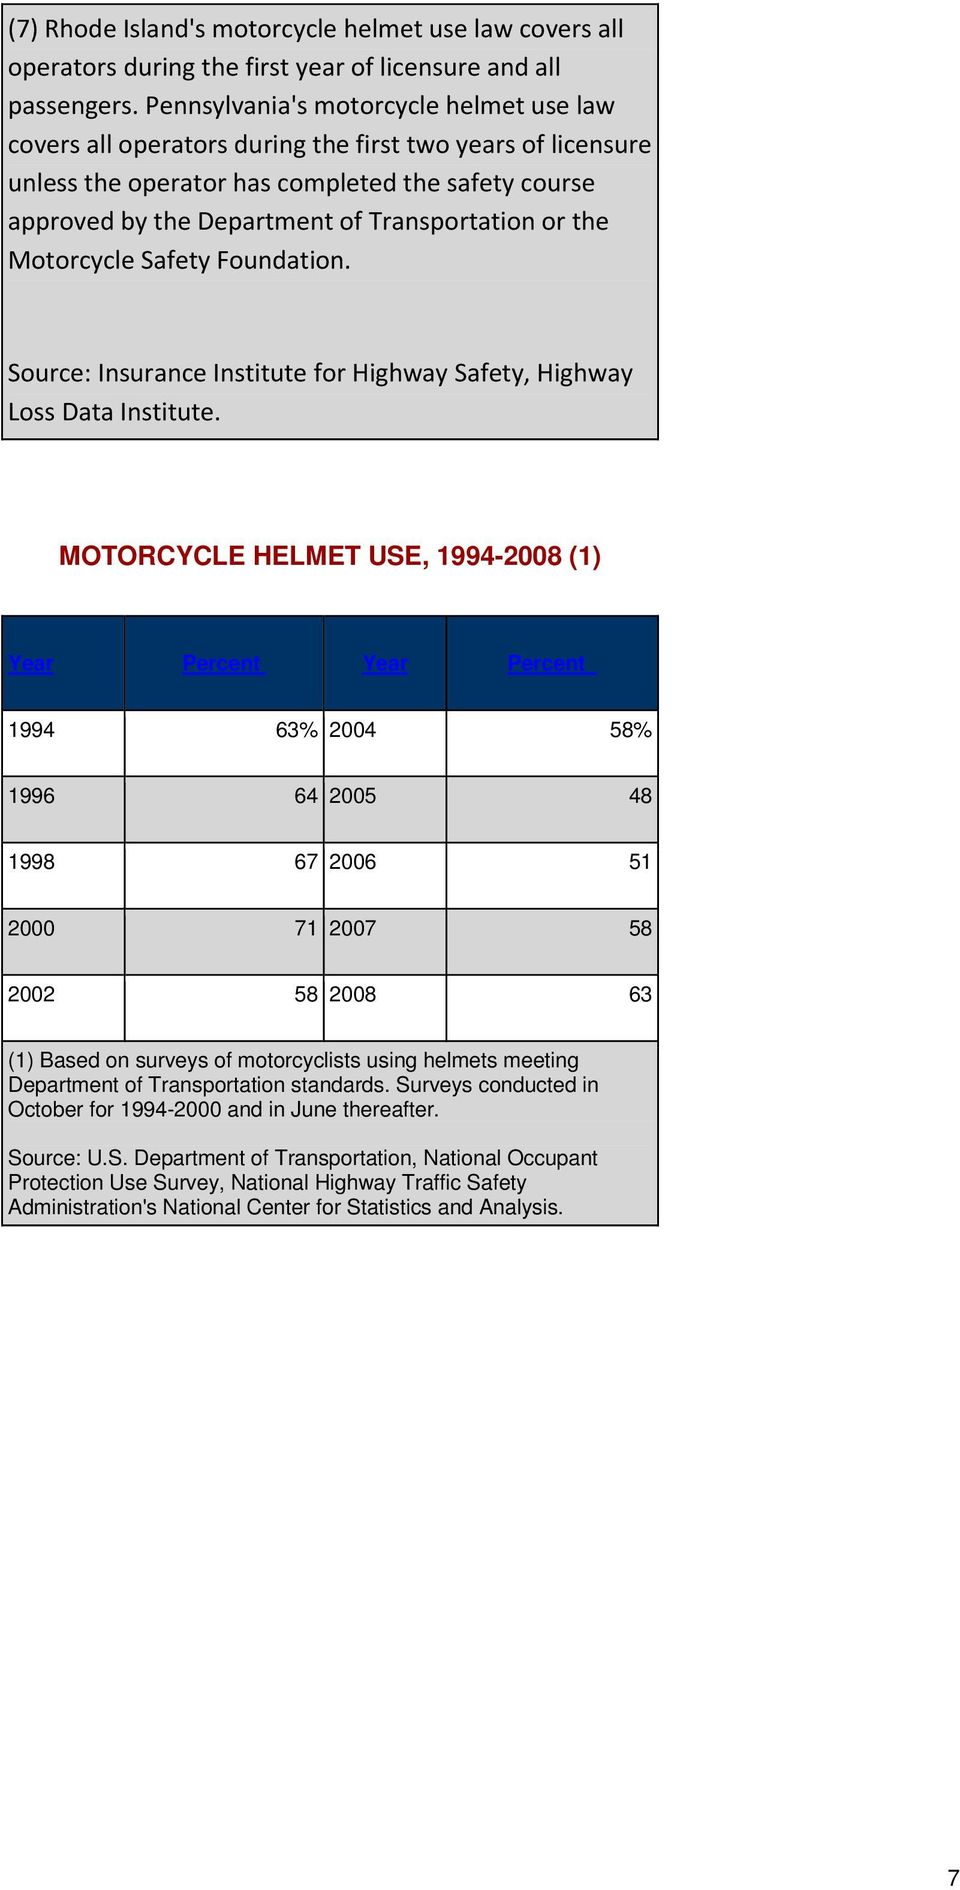 or the Motorcycle Safety Foundation. Source: Insurance Institute for Highway Safety, Highway Loss Data Institute.